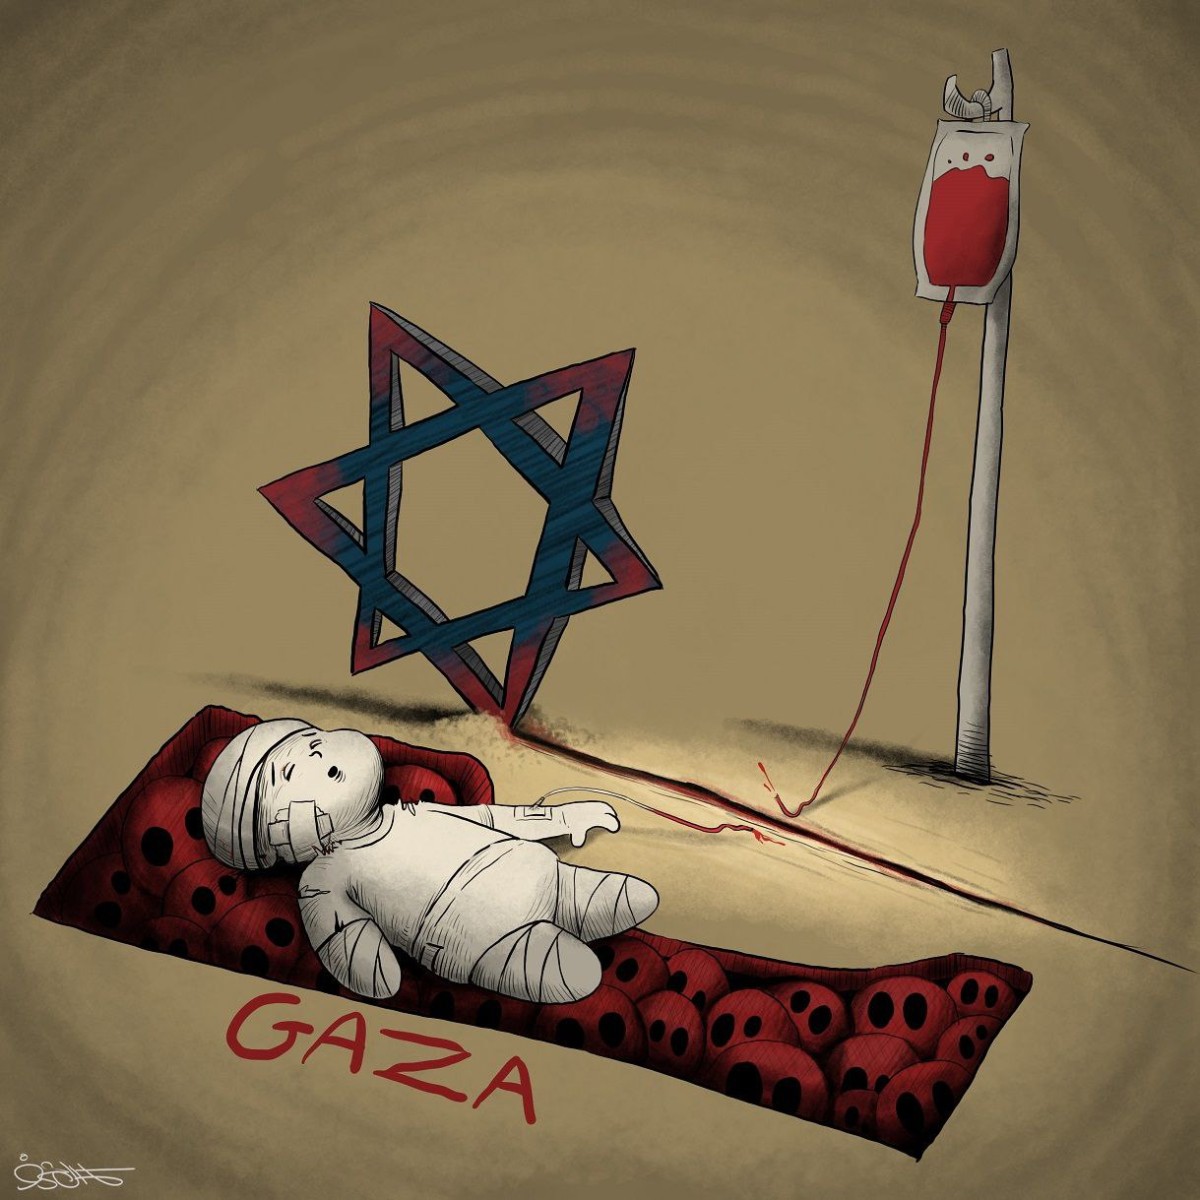 The situation of children in Gaza